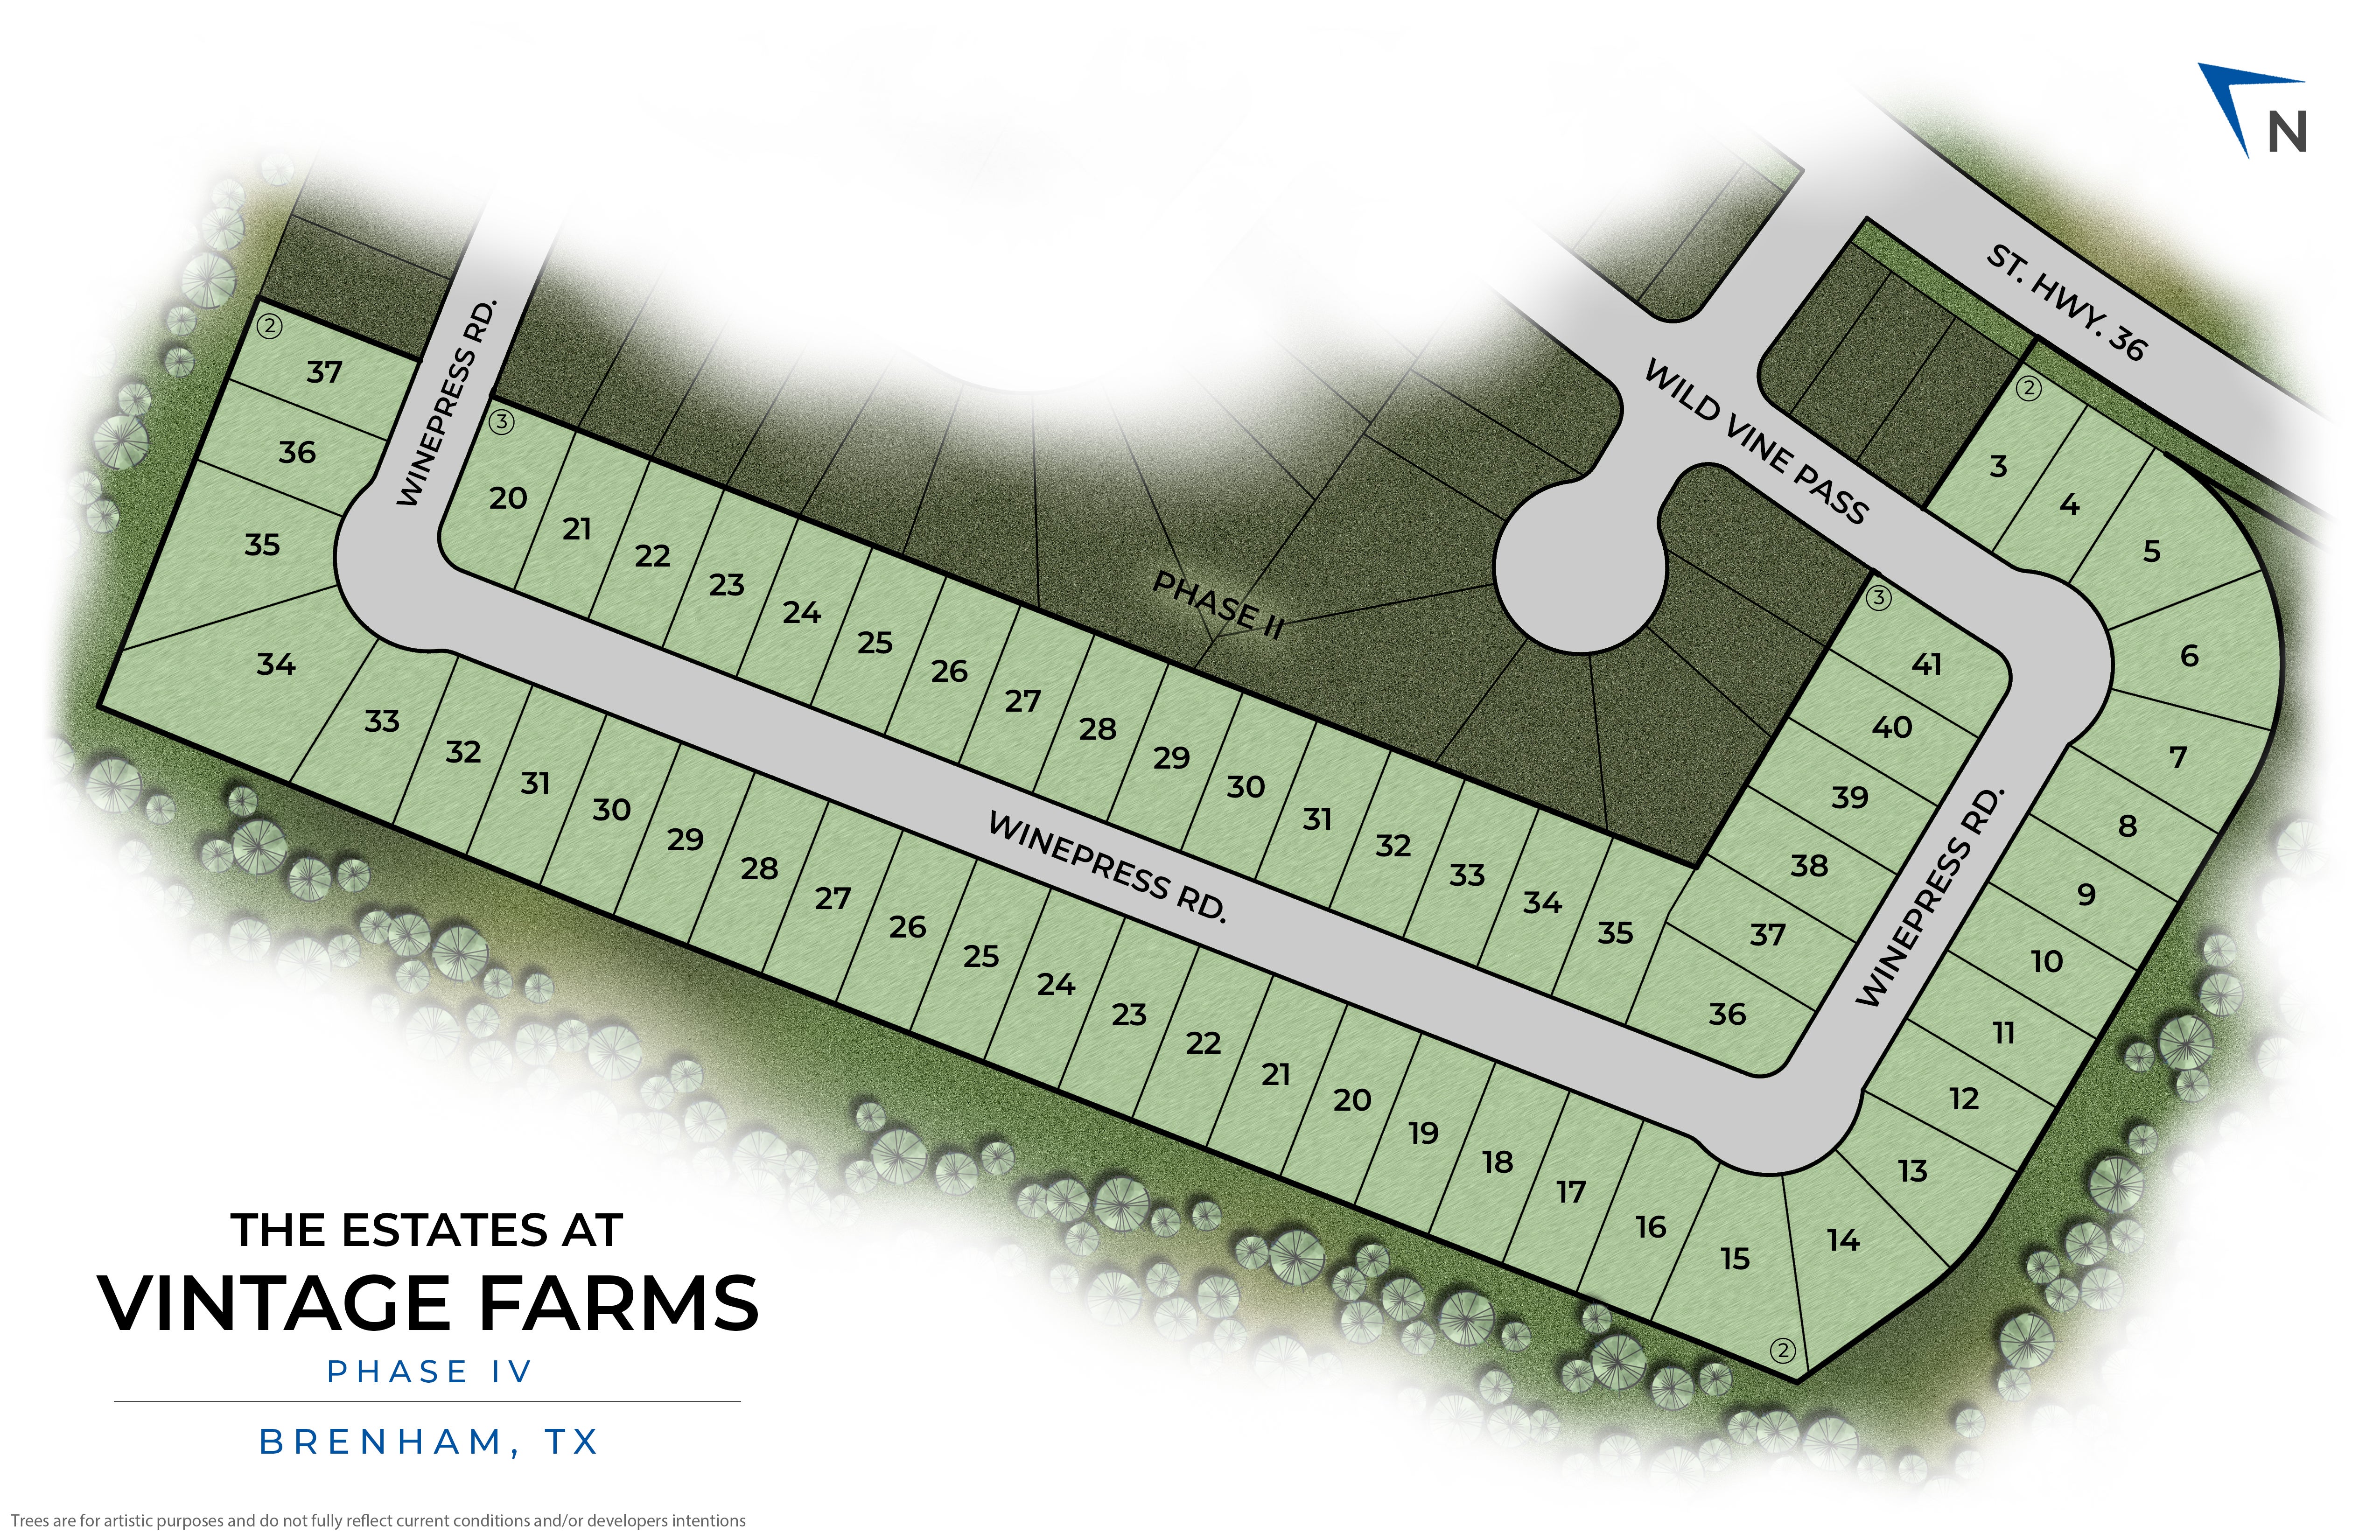 Brenham, TX The Estates at Vintage Farms New Homes from Stylecraft Builders